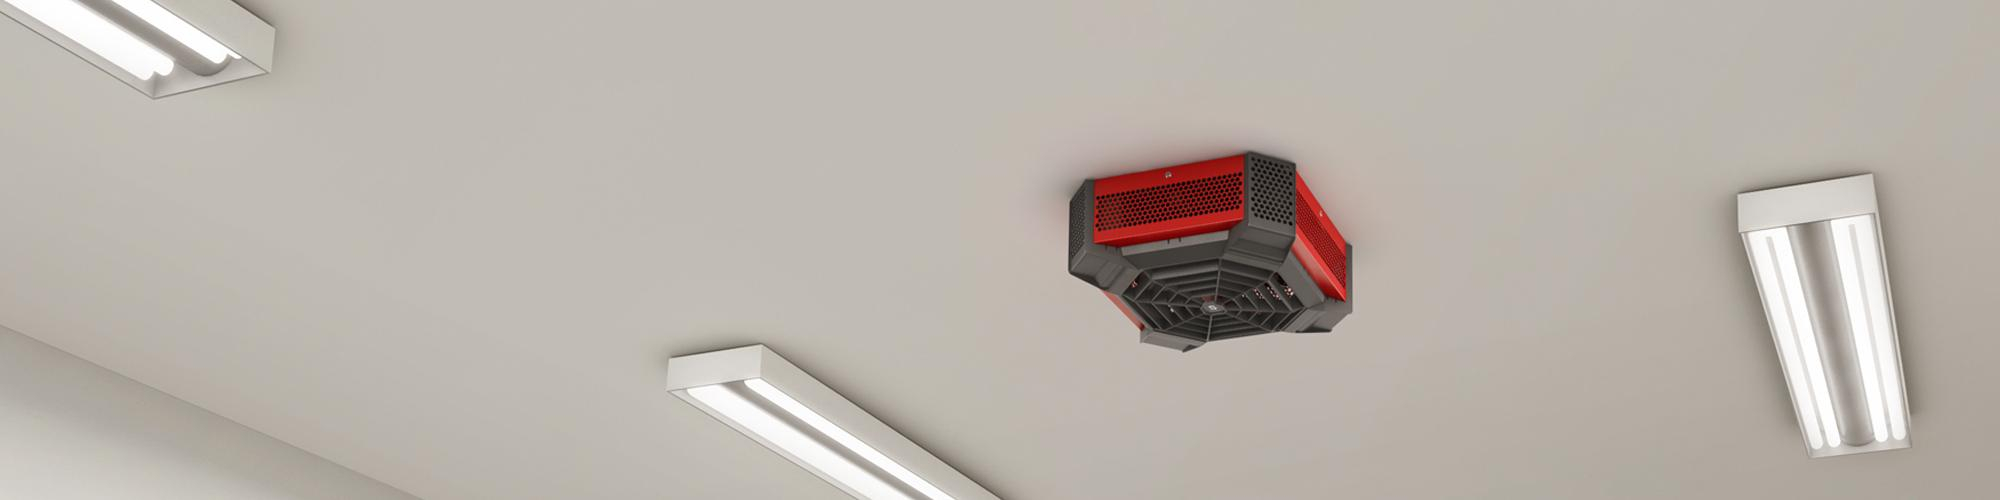 The Spider In Your Garage Stelpro Ceiling Fan Heater within size 2000 X 500